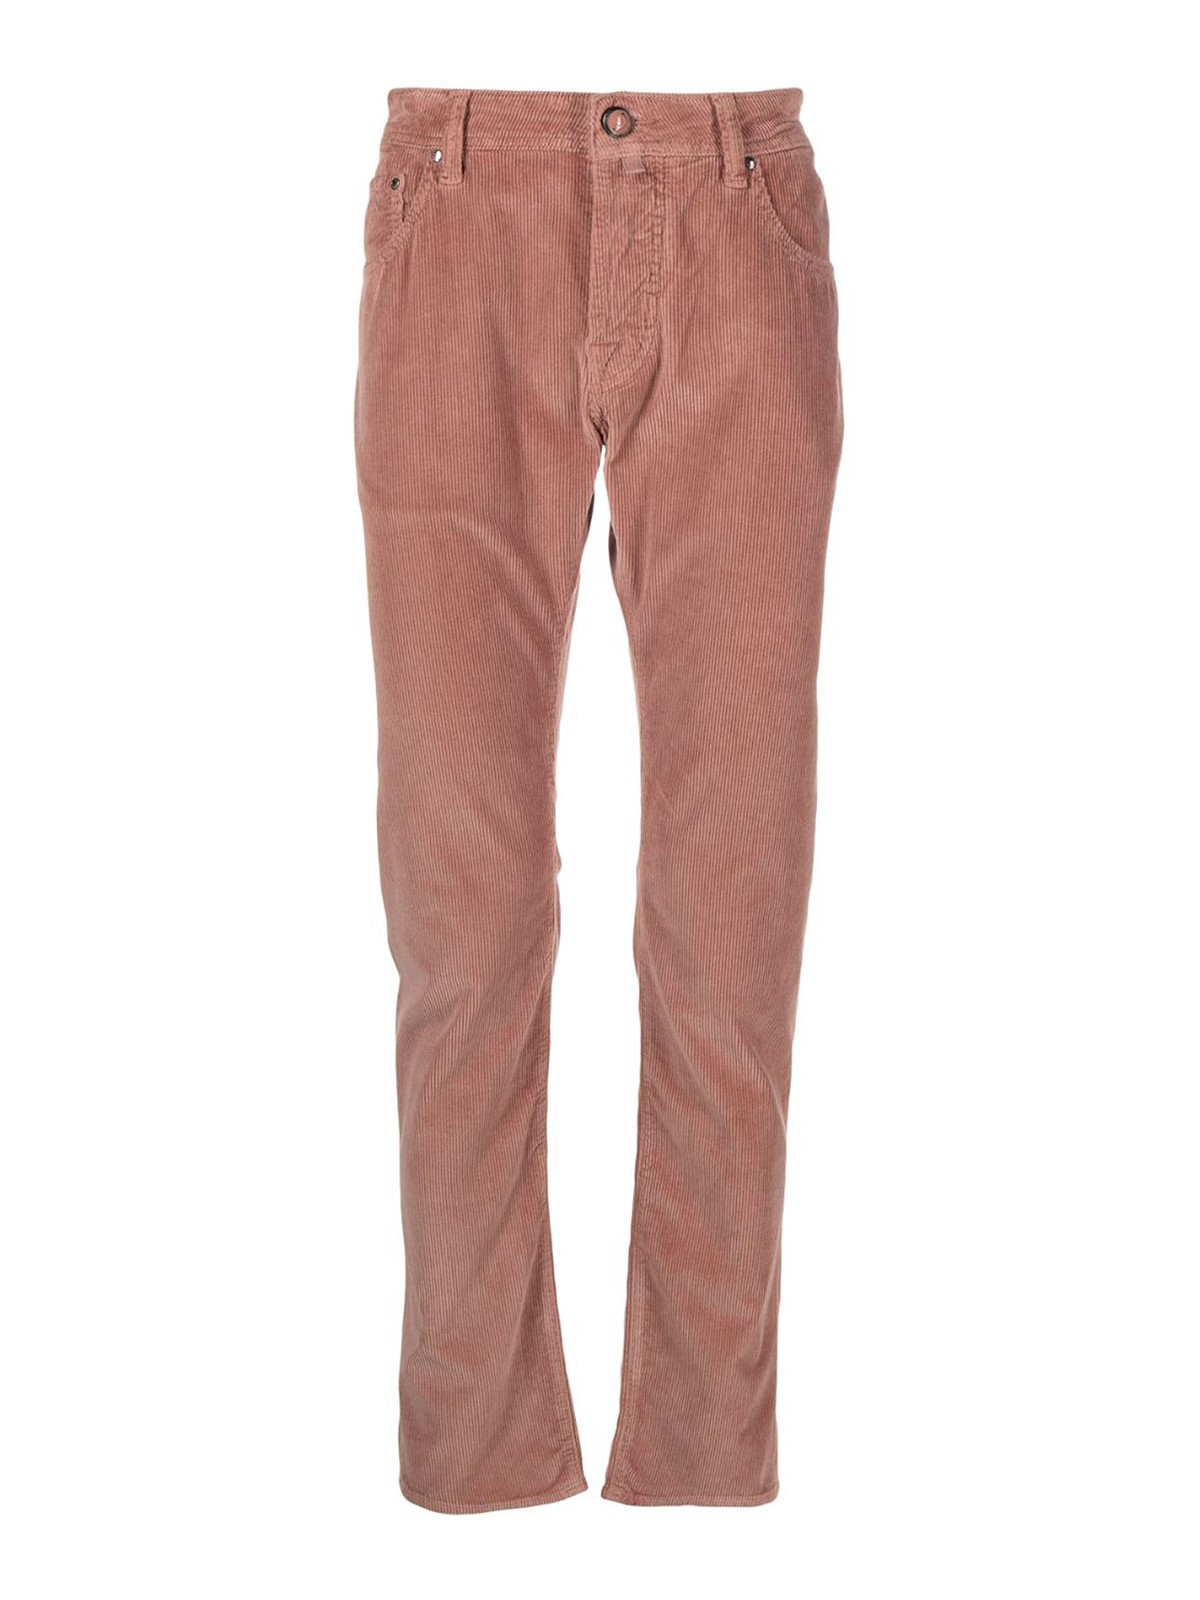 Buy Calvin Klein Slim Fit Draw Cord Trousers - NNNOW.com